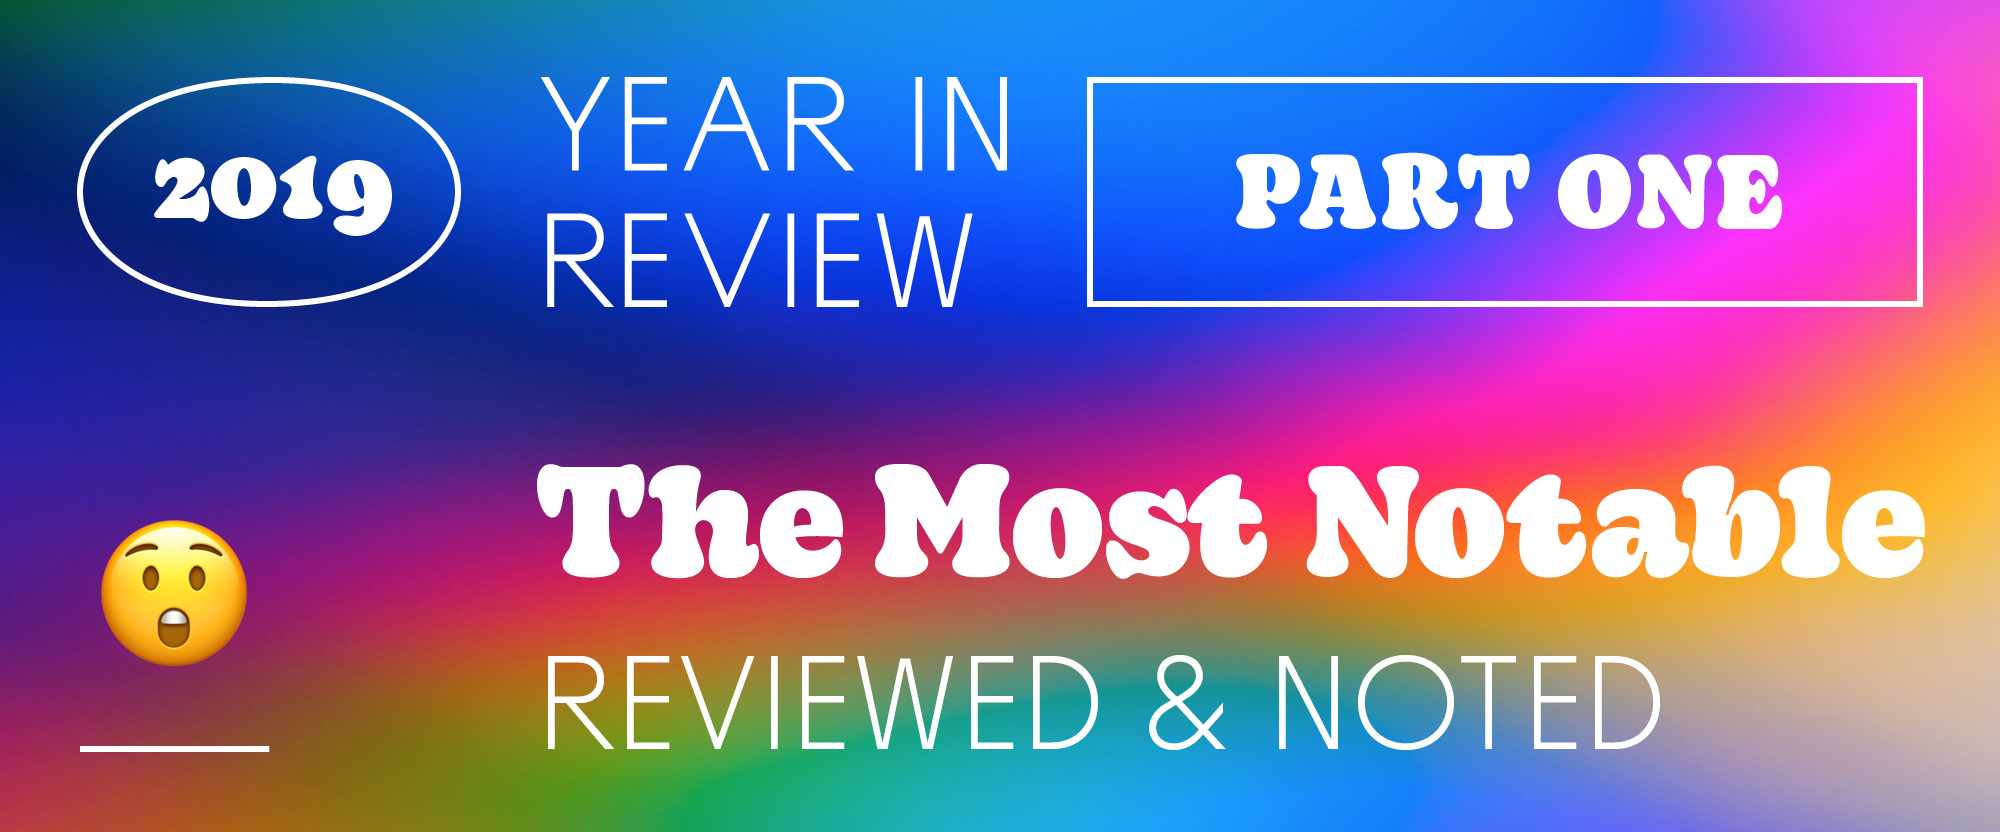 The Best and Worst Identities of 2019, Part 1: The Most Notable Reviewed & Noted